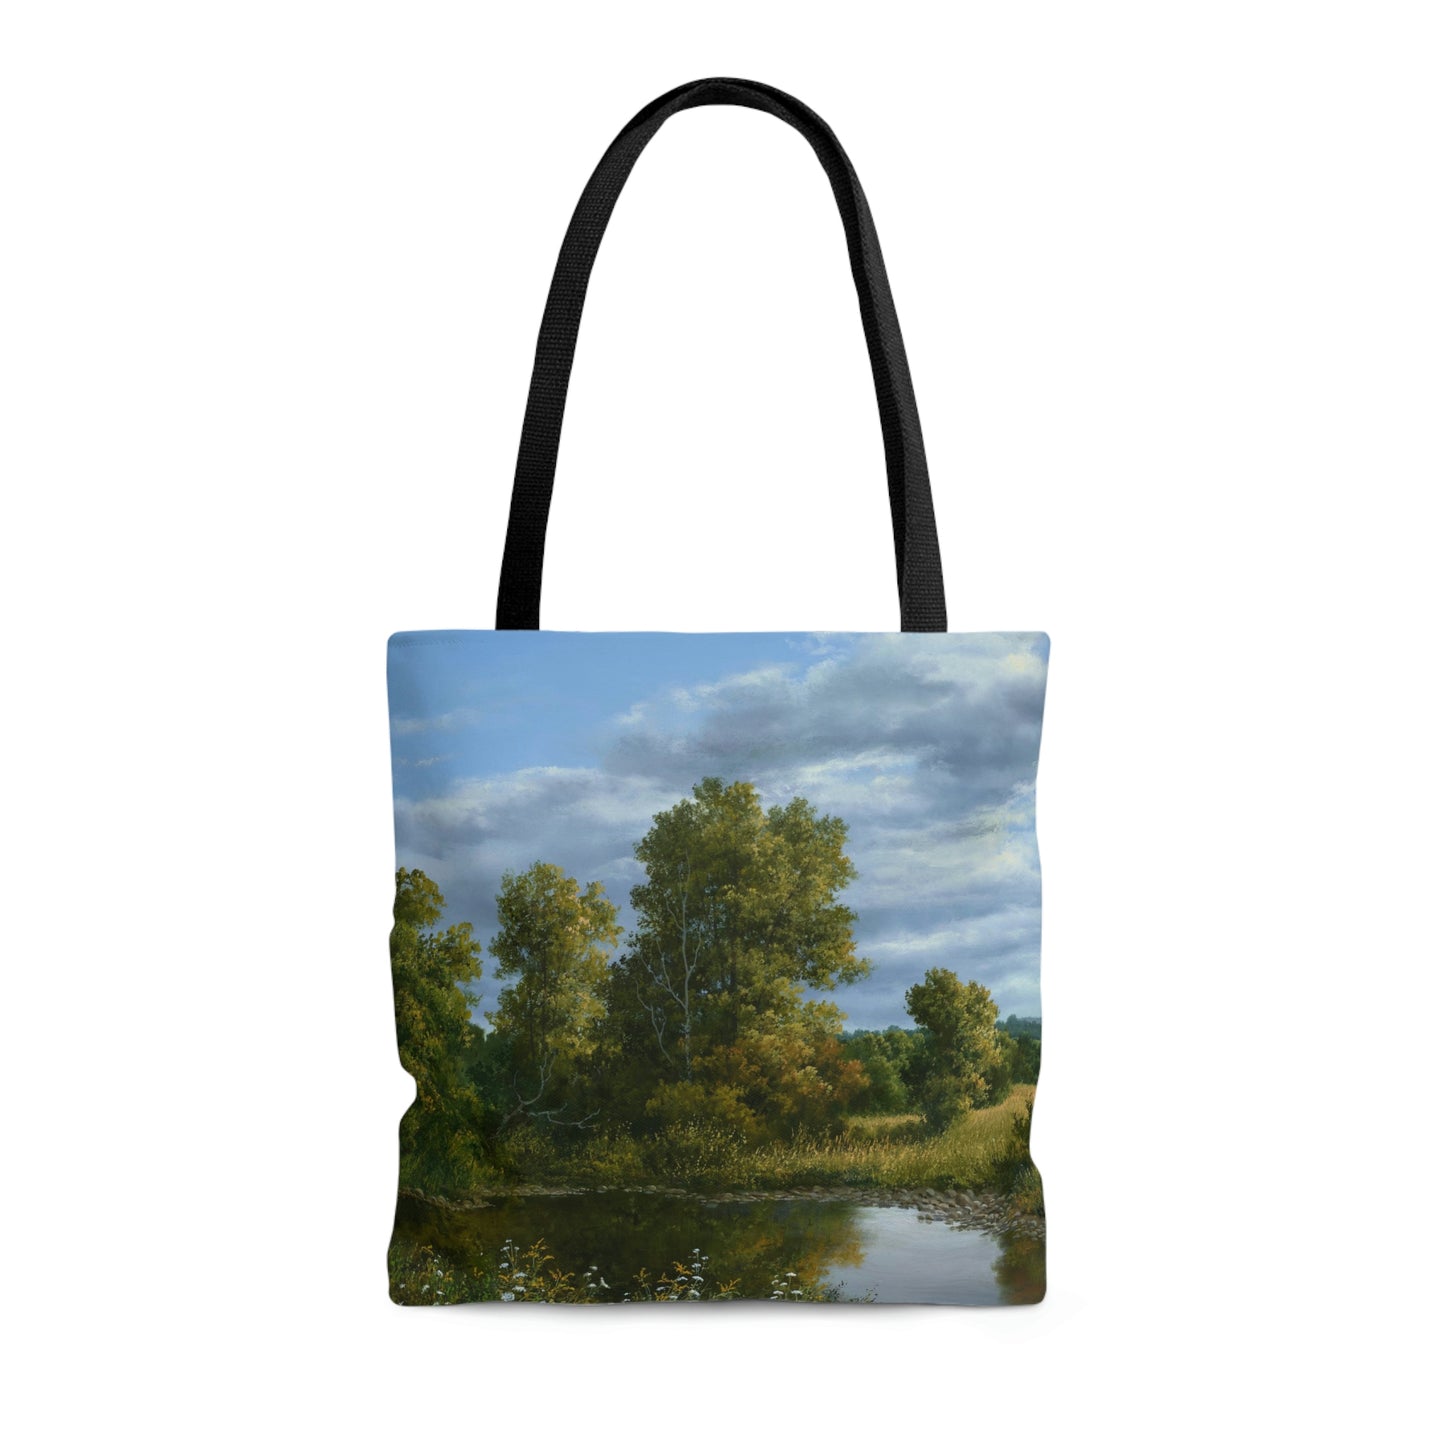 Andrew Orr: "The Pond in Late Summer" - AOP Tote Bag